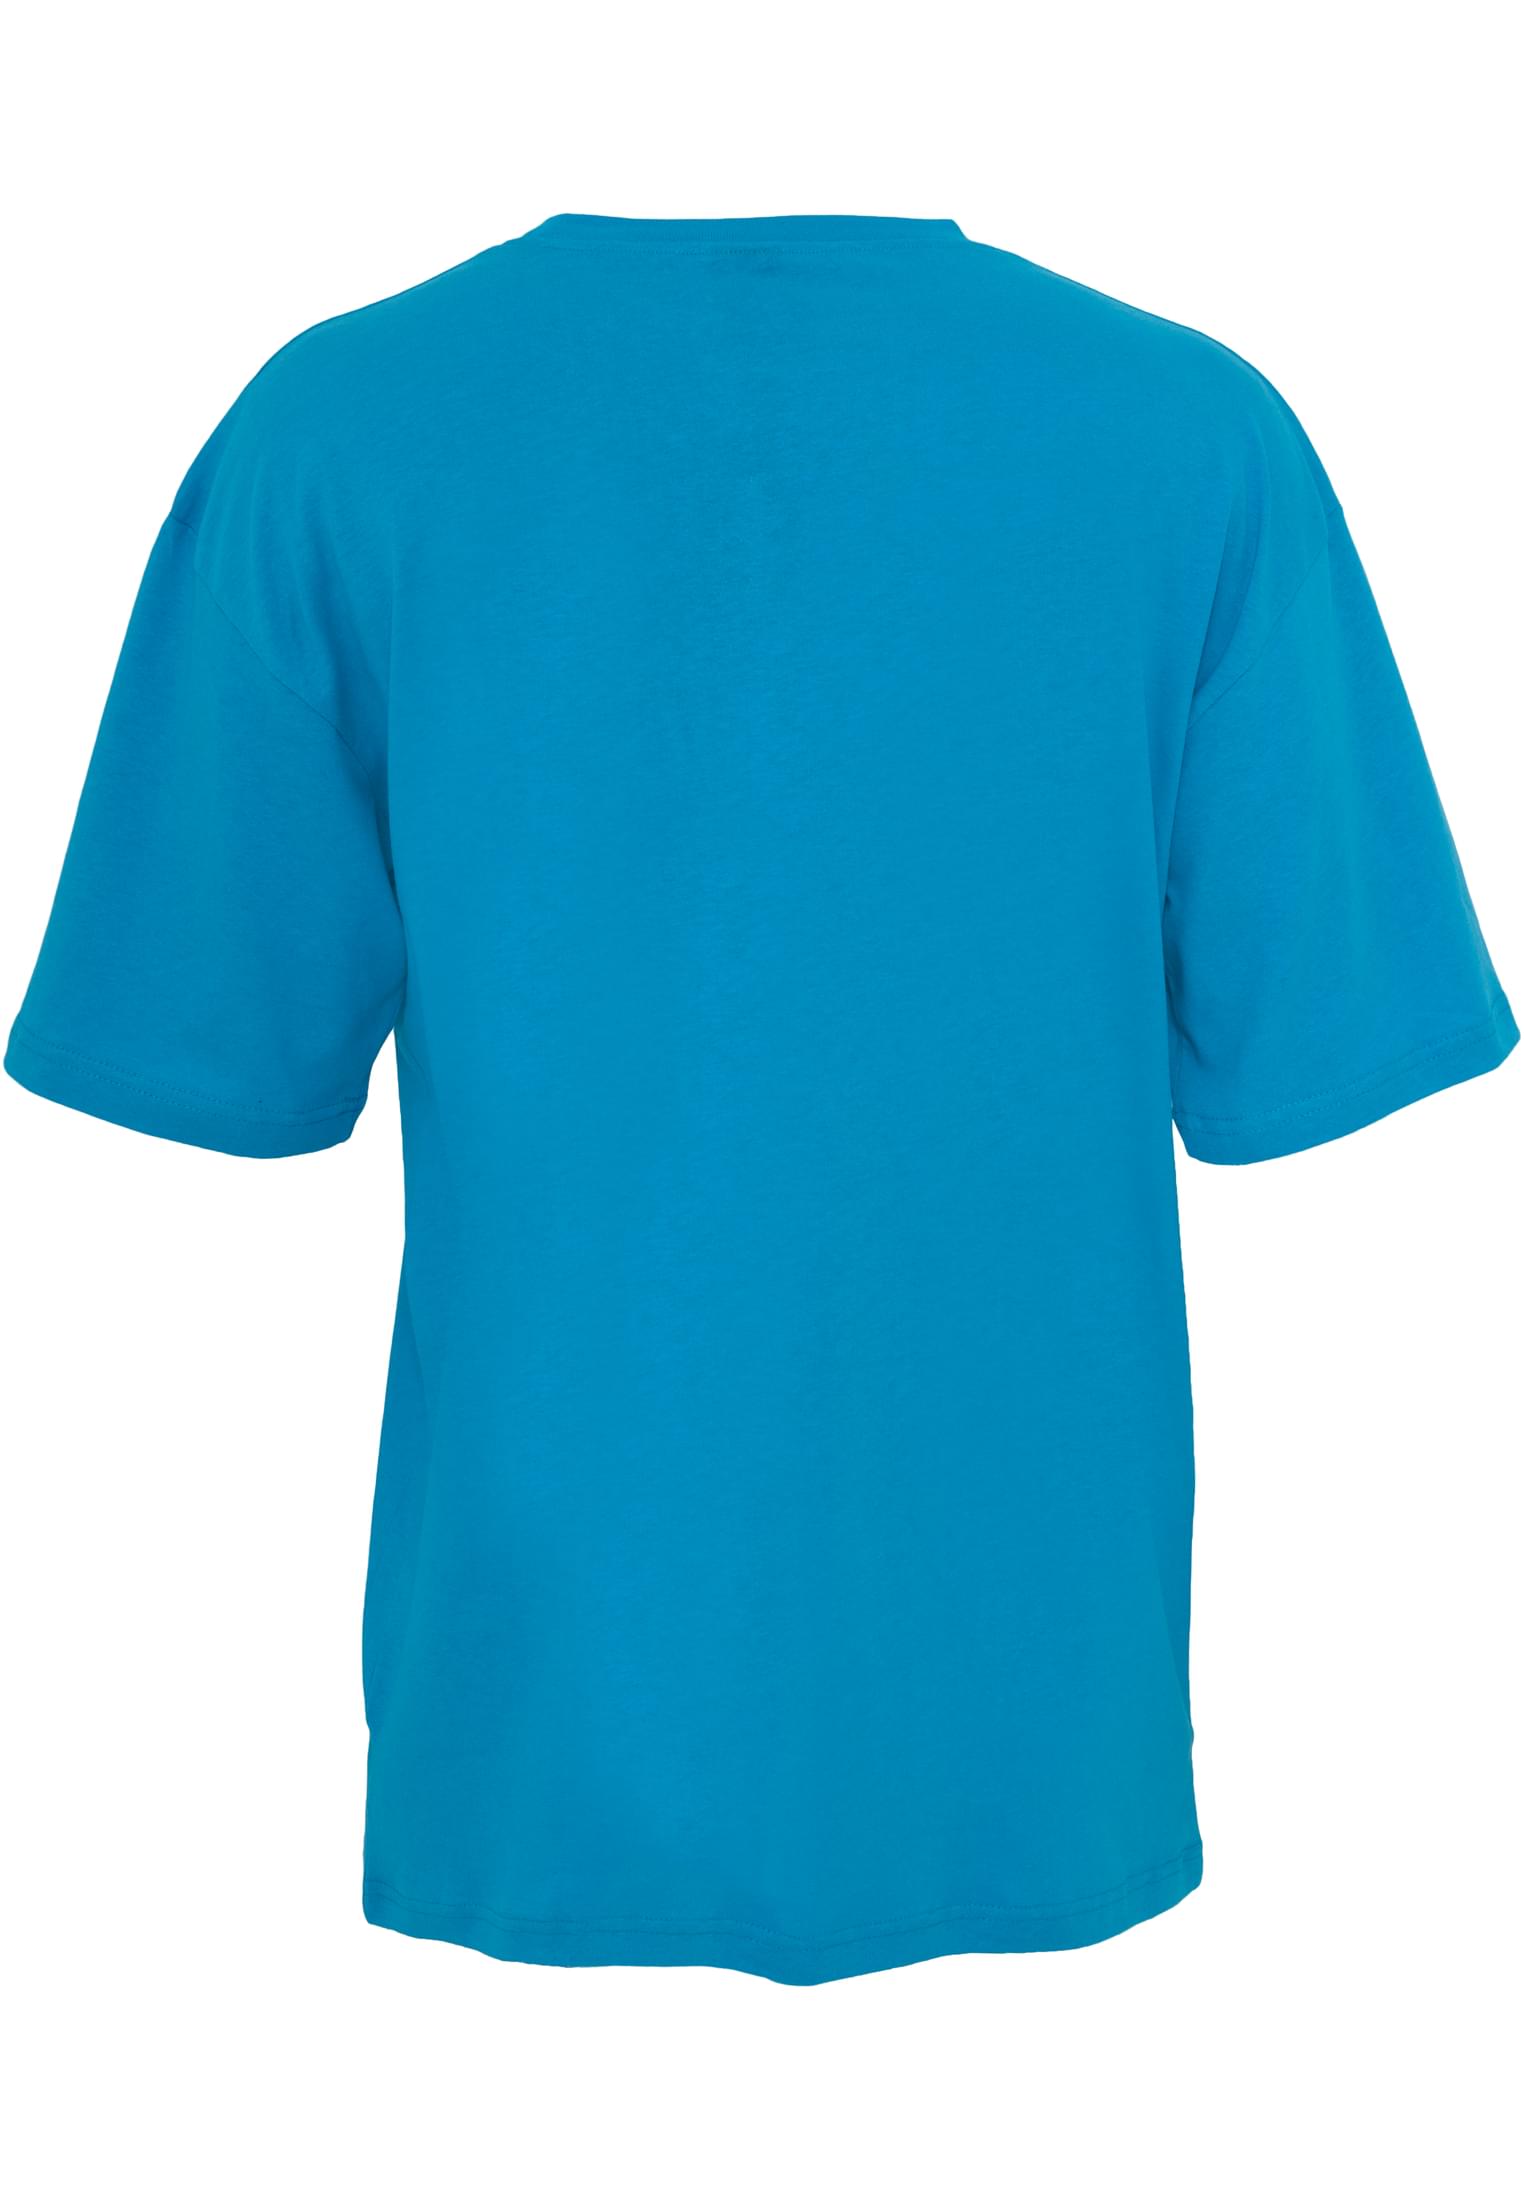 Plus Size Tall Tee in Farbe turquoise